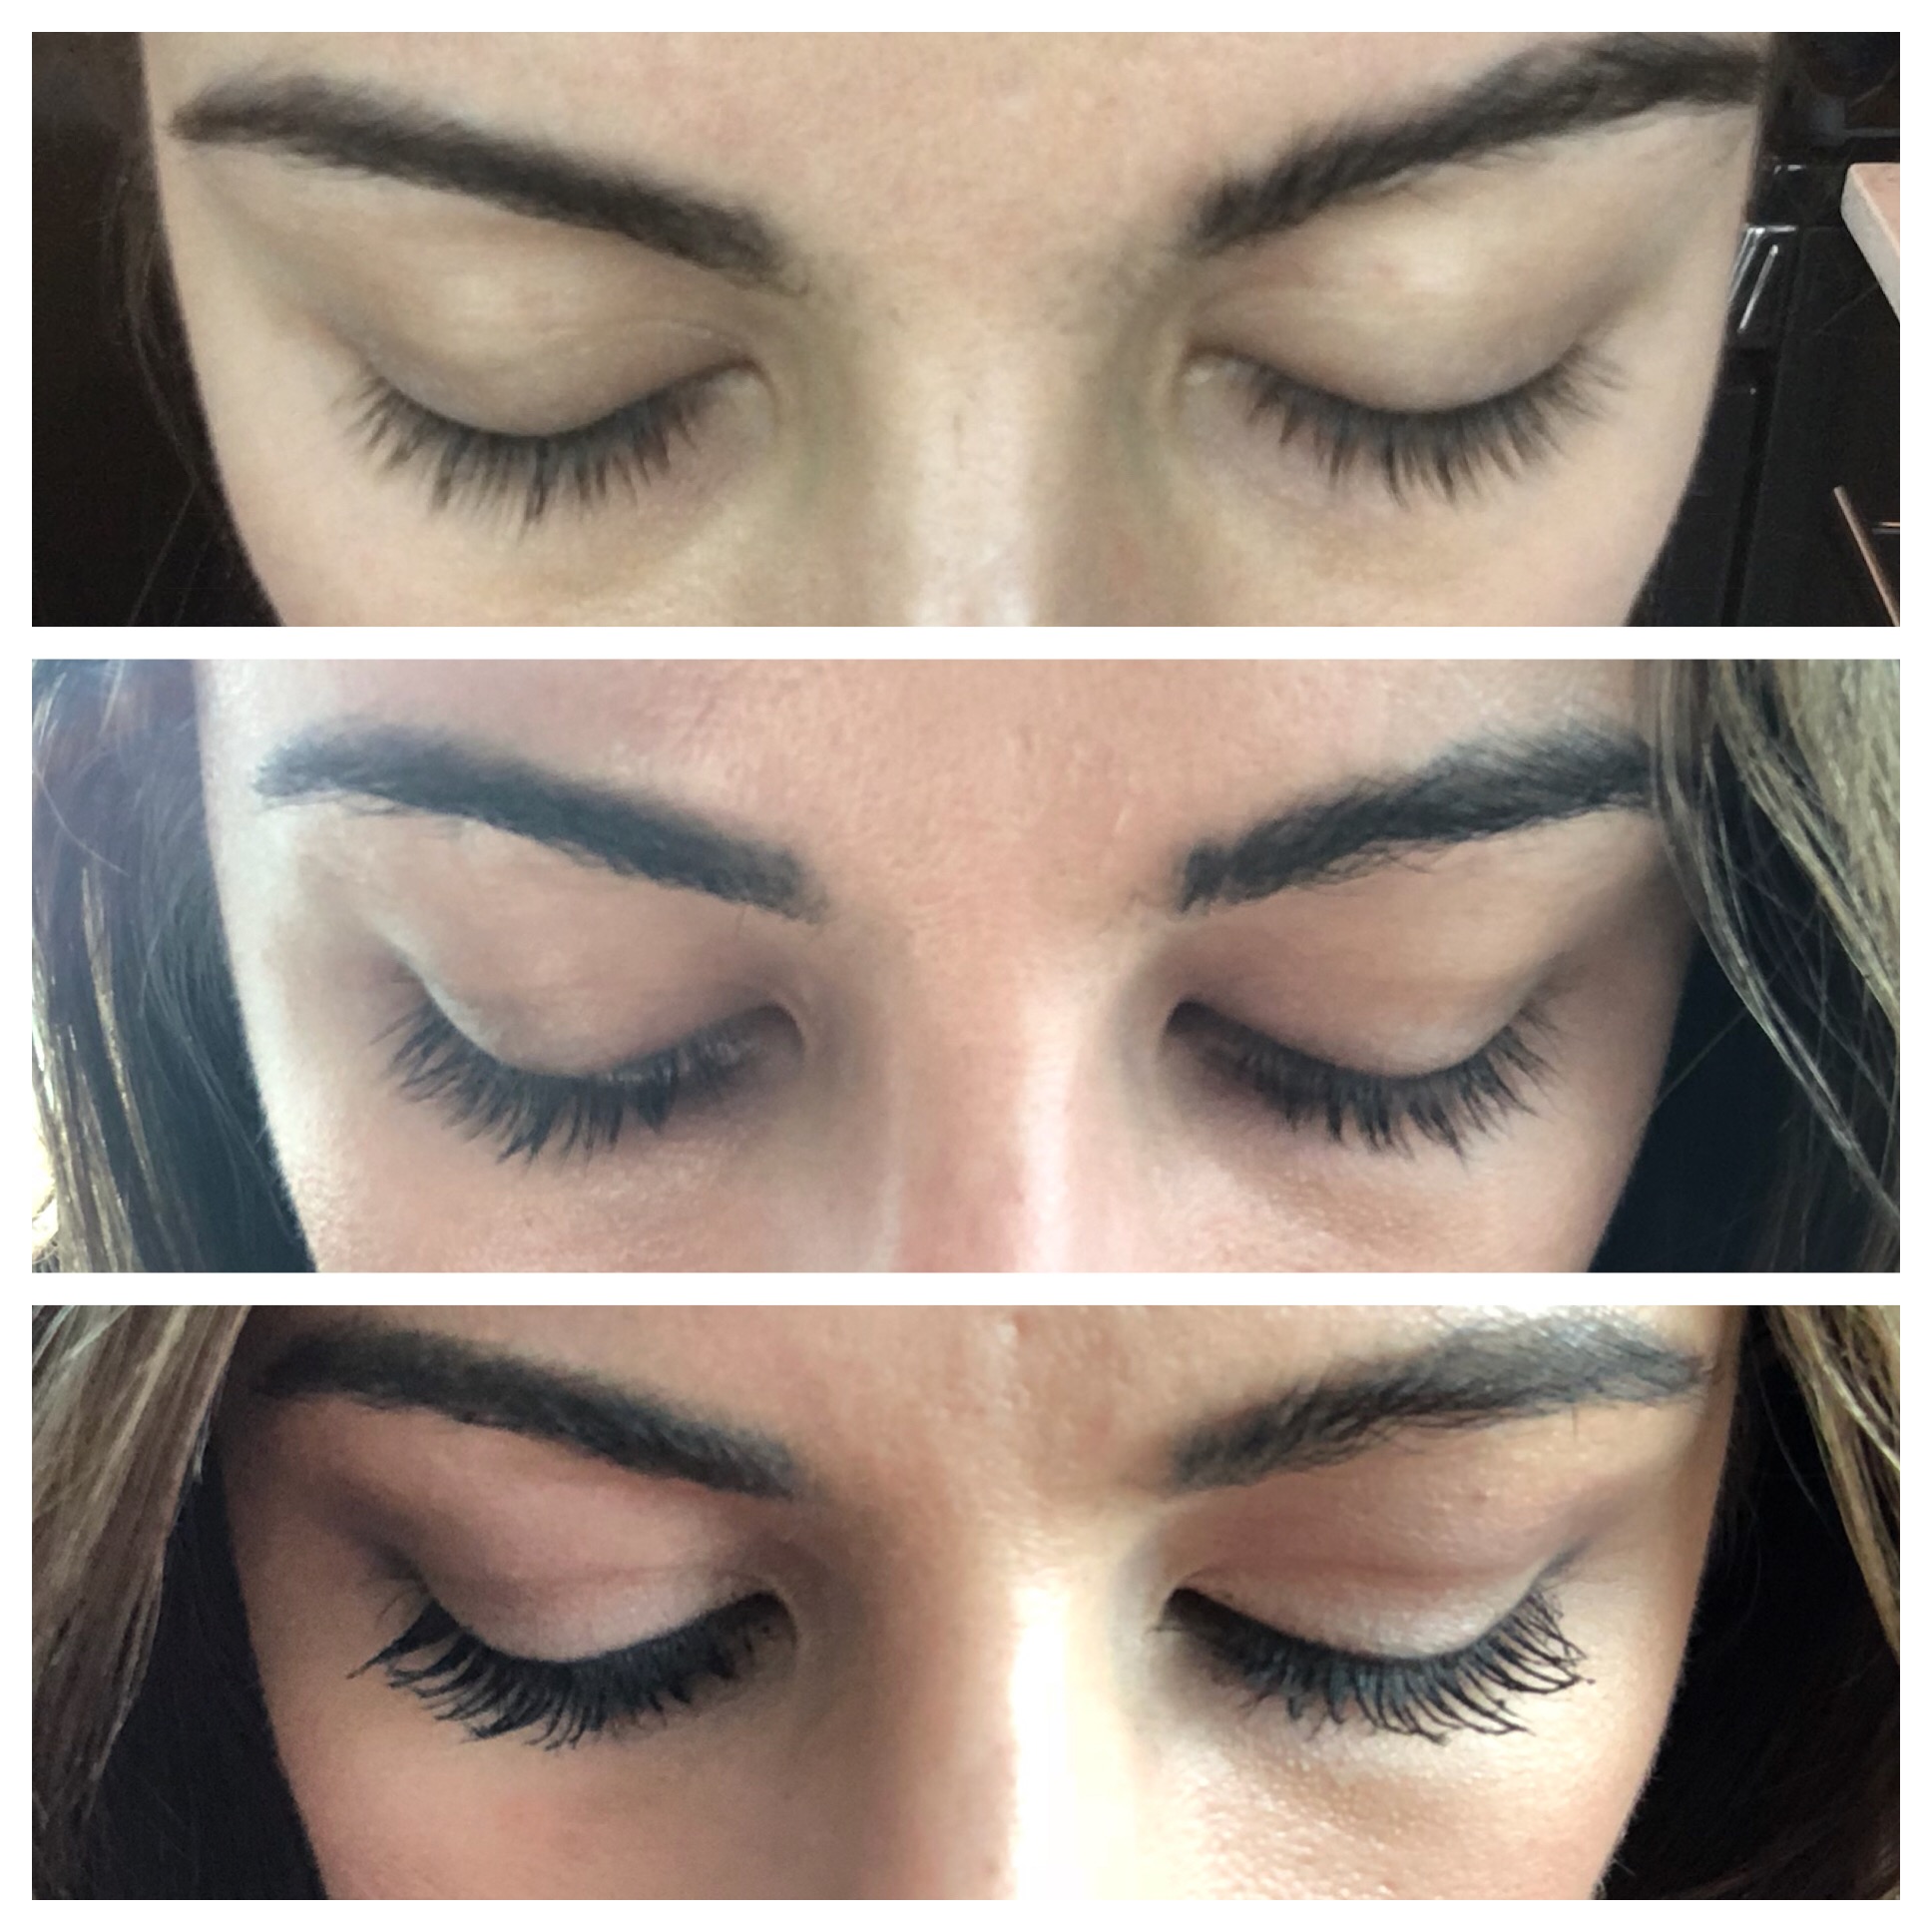 Lifestyle blogger Roxanne of Glass of Glam's review of Rodan and Field's Lash Boost - Friday Fizz: My Honest Review of Rodan + Fields Lash Boost featured by popular Chicago style blogger, Glass of Glam